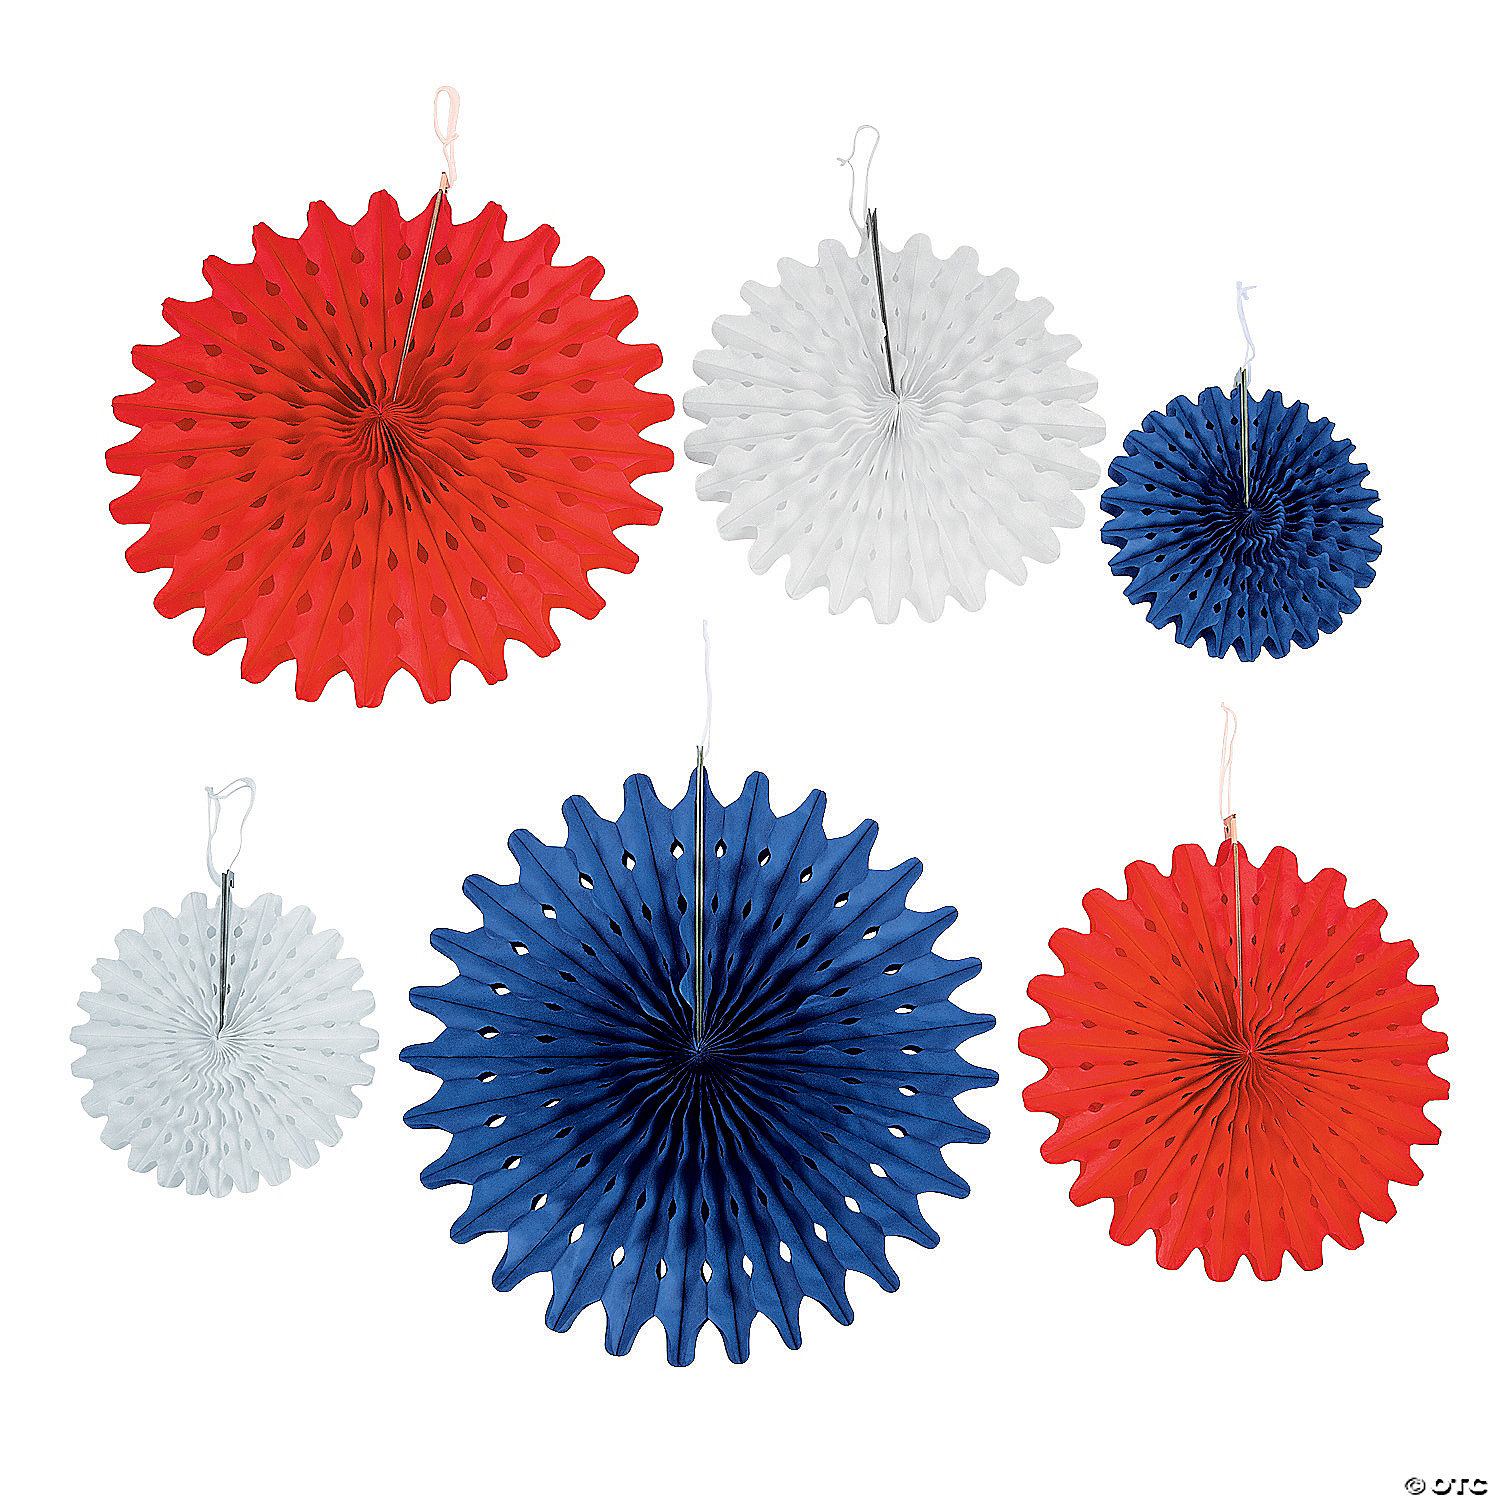 iShyan 4th of July Decorations Paper Fan for Patriotic Decoration Independence Day Party Supplies Red White Blue Hanging Paper Fans 6pcs 